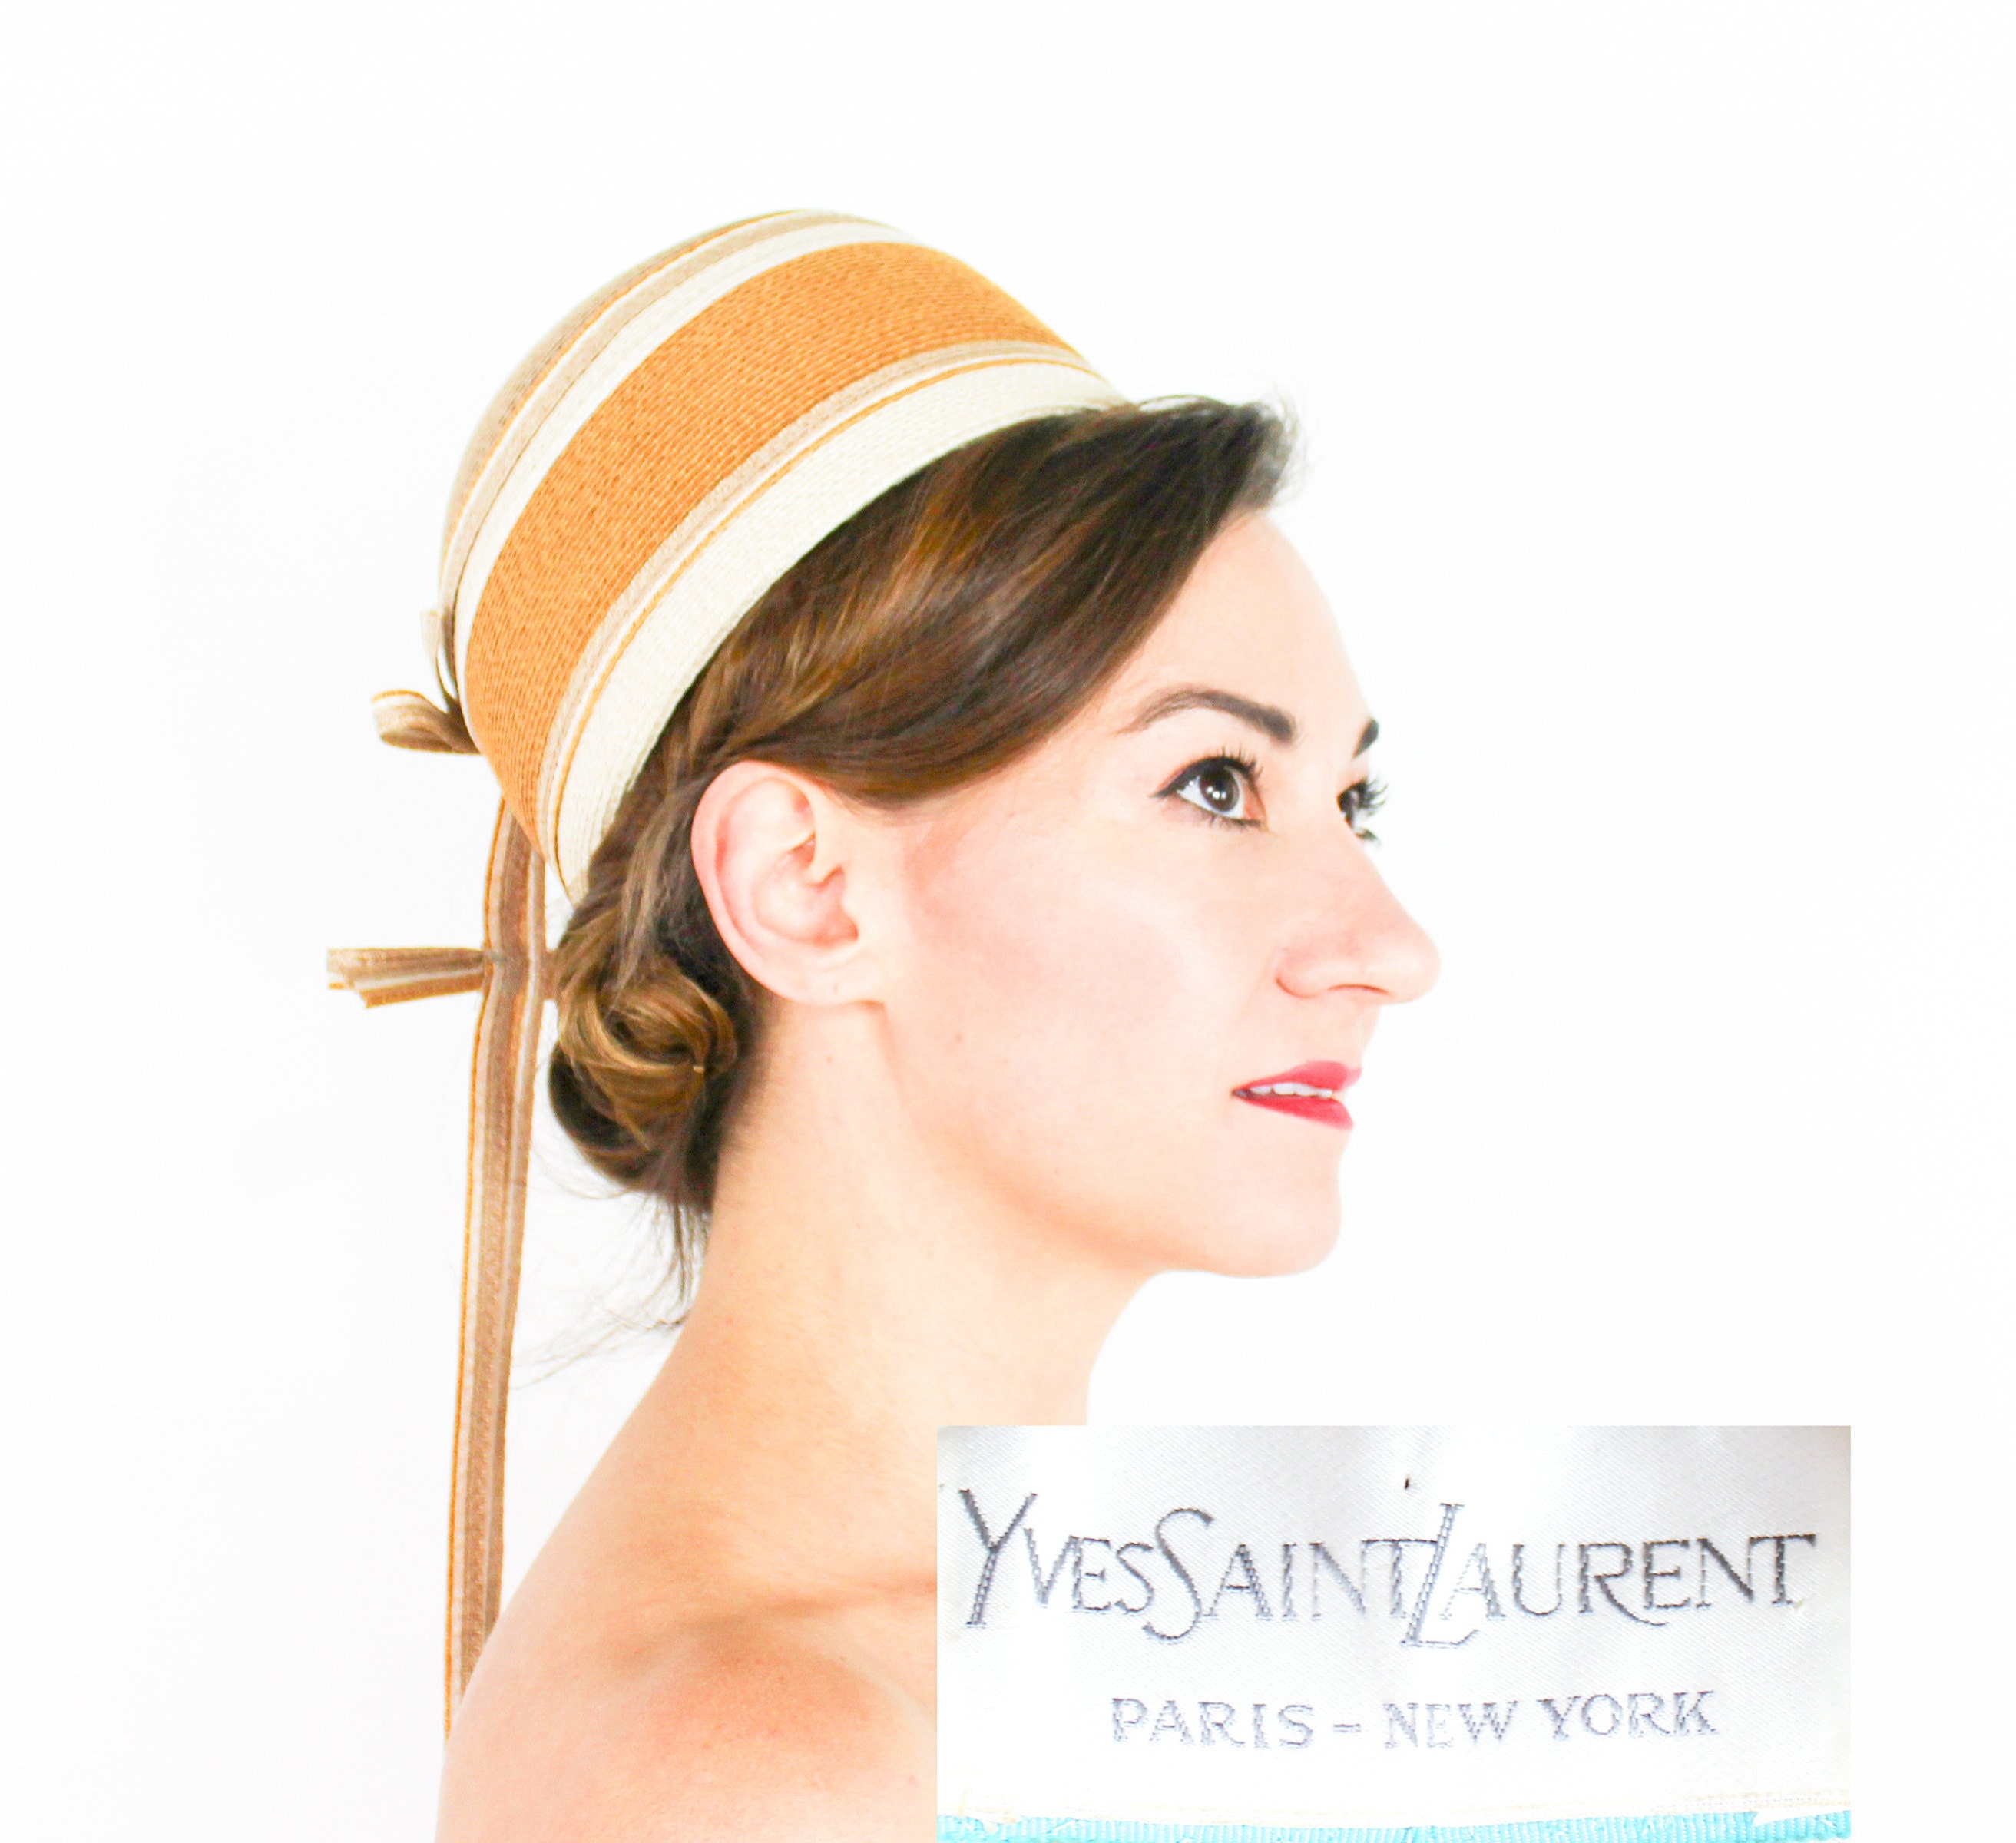 1980s Yves Saint Laurent Straw Boater Hat - MRS Couture